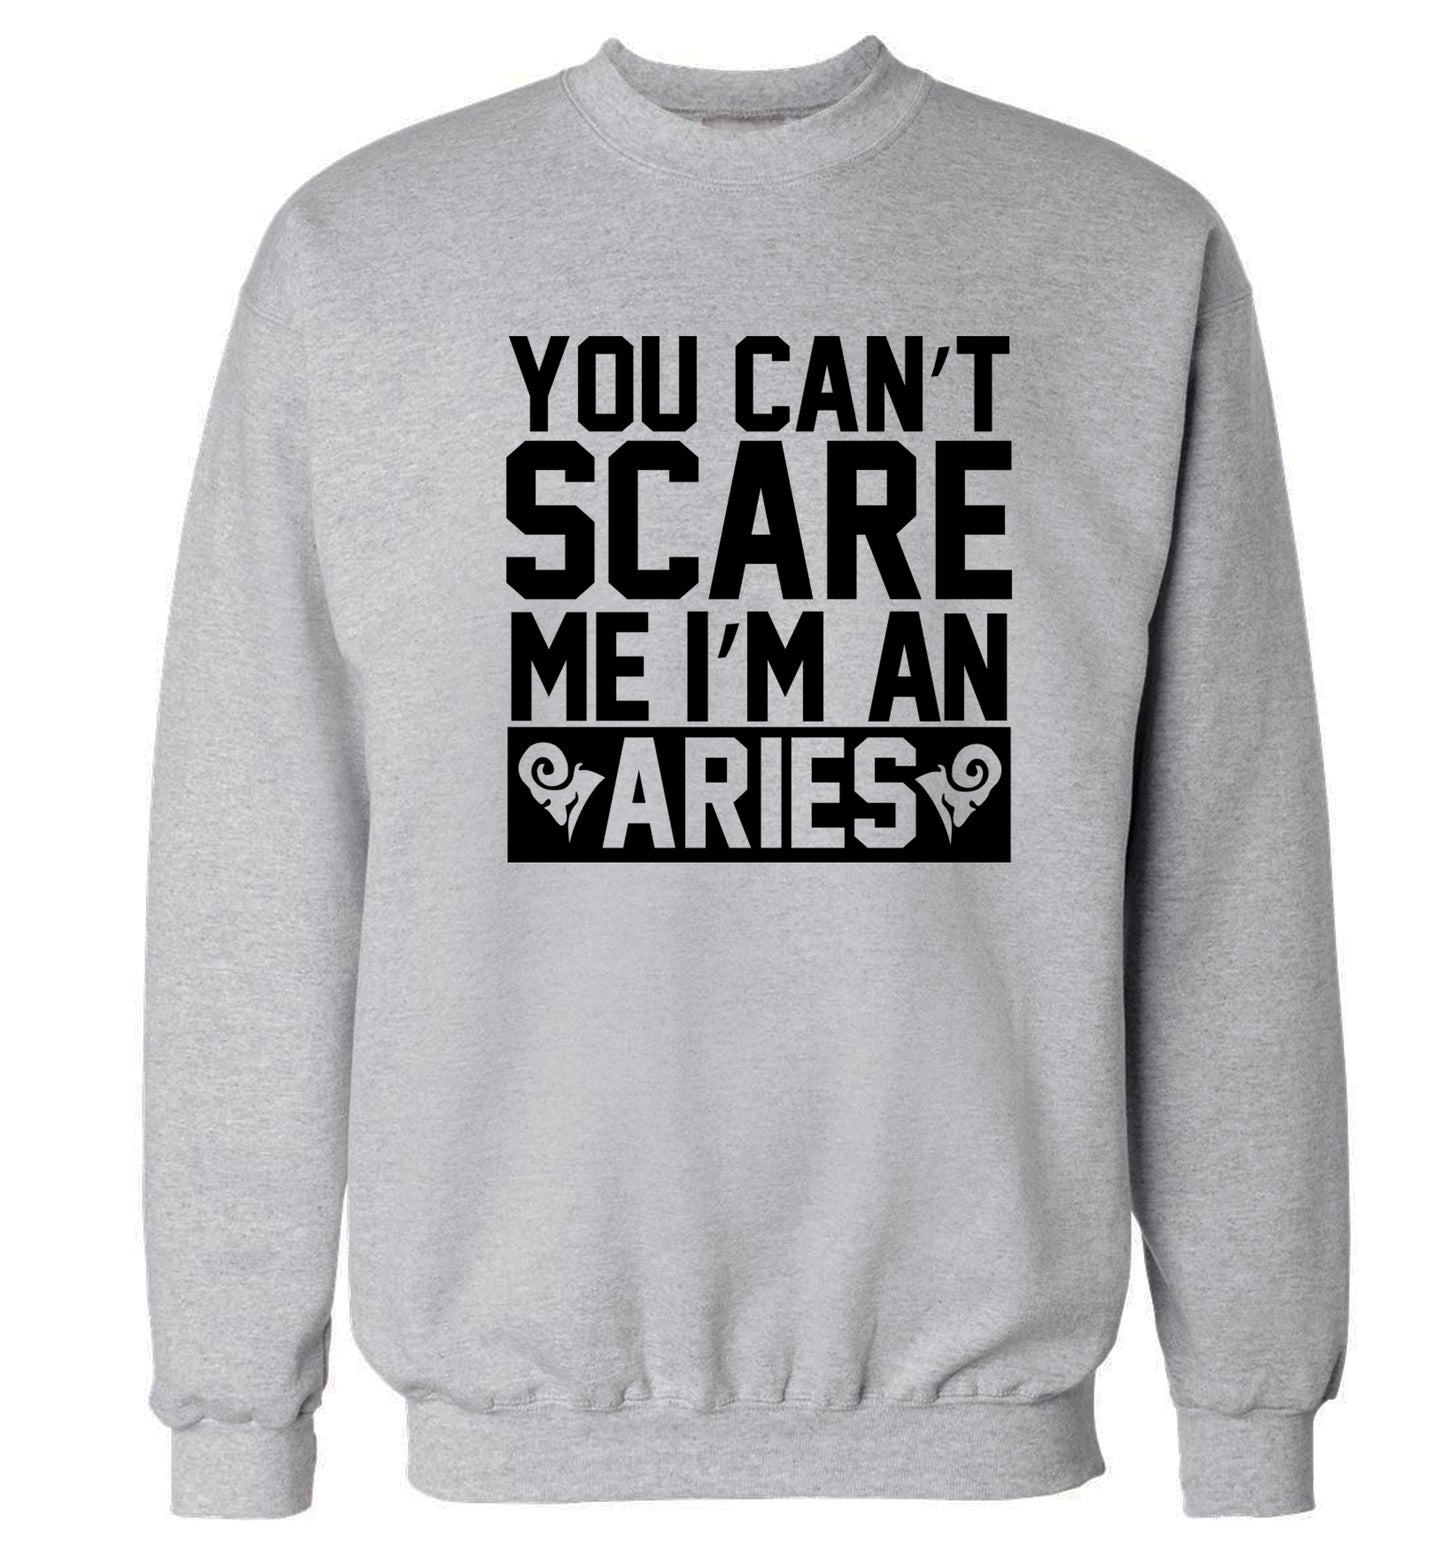 You can't scare me I'm an aries Adult's unisex grey Sweater 2XL